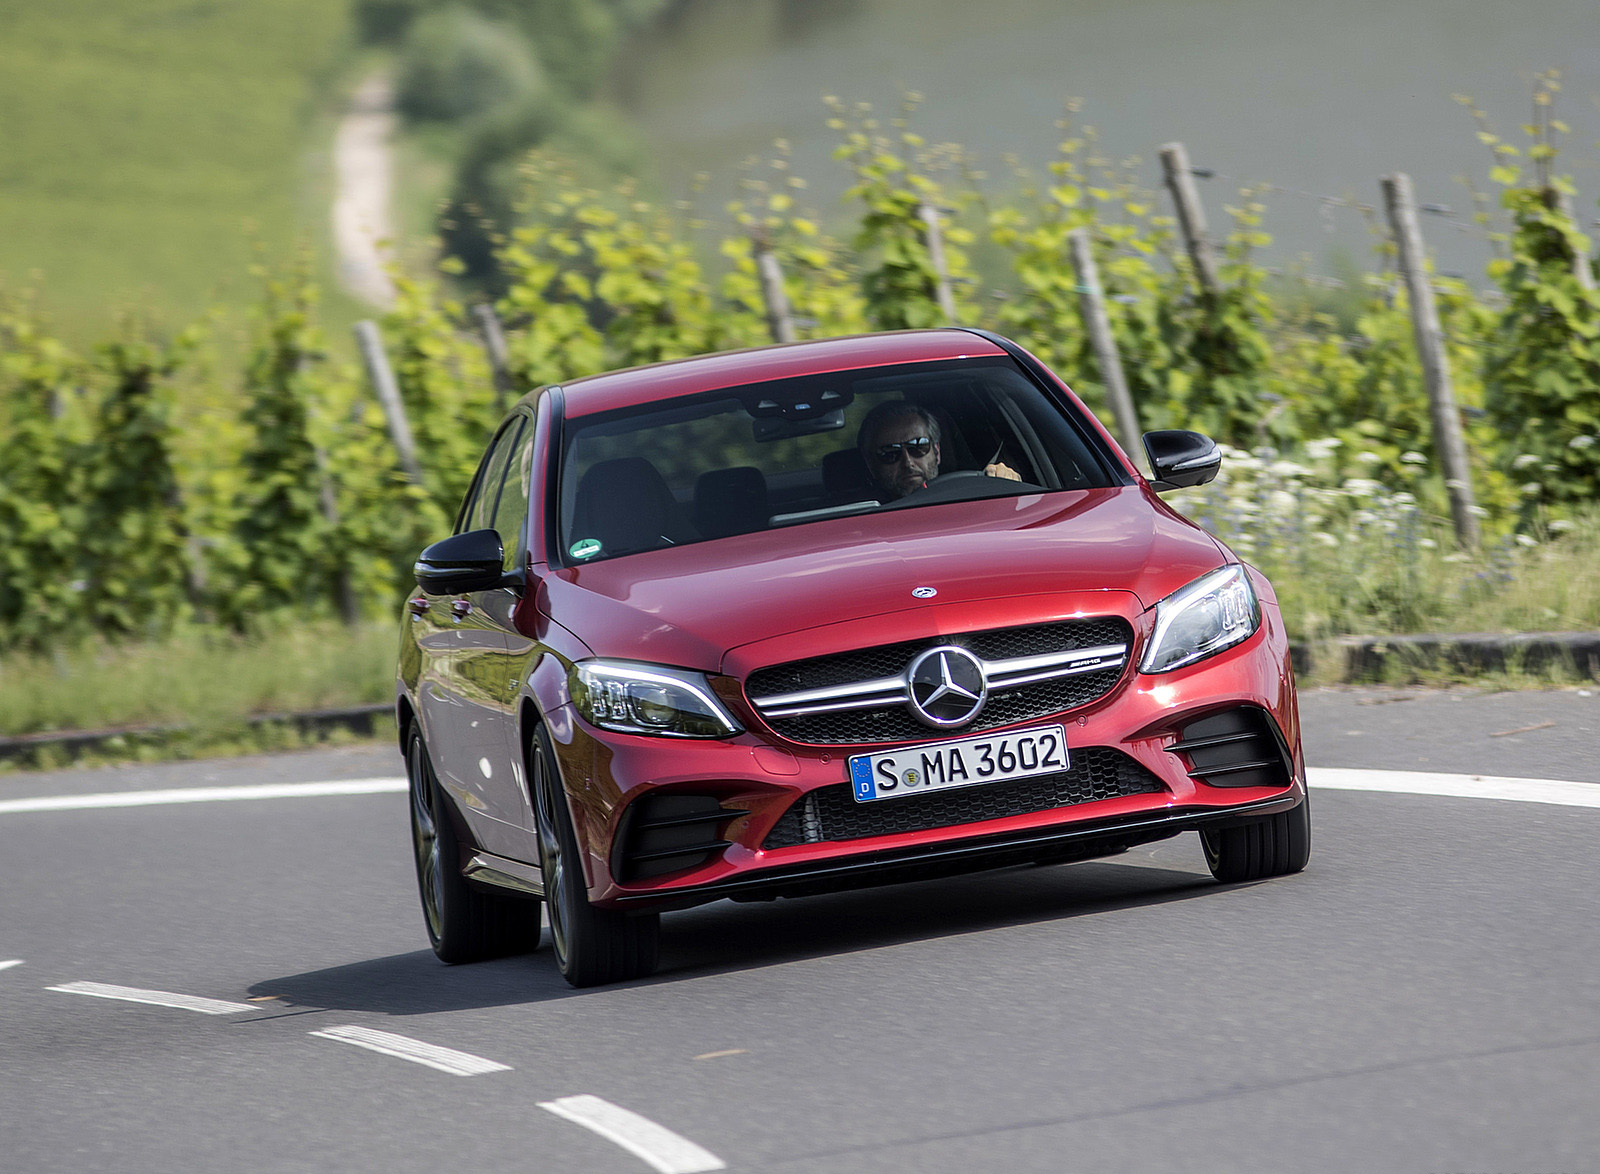 2019 Mercedes-AMG C43 4MATIC Sedan (Color: Hyacinth Red) Front Wallpapers (10)